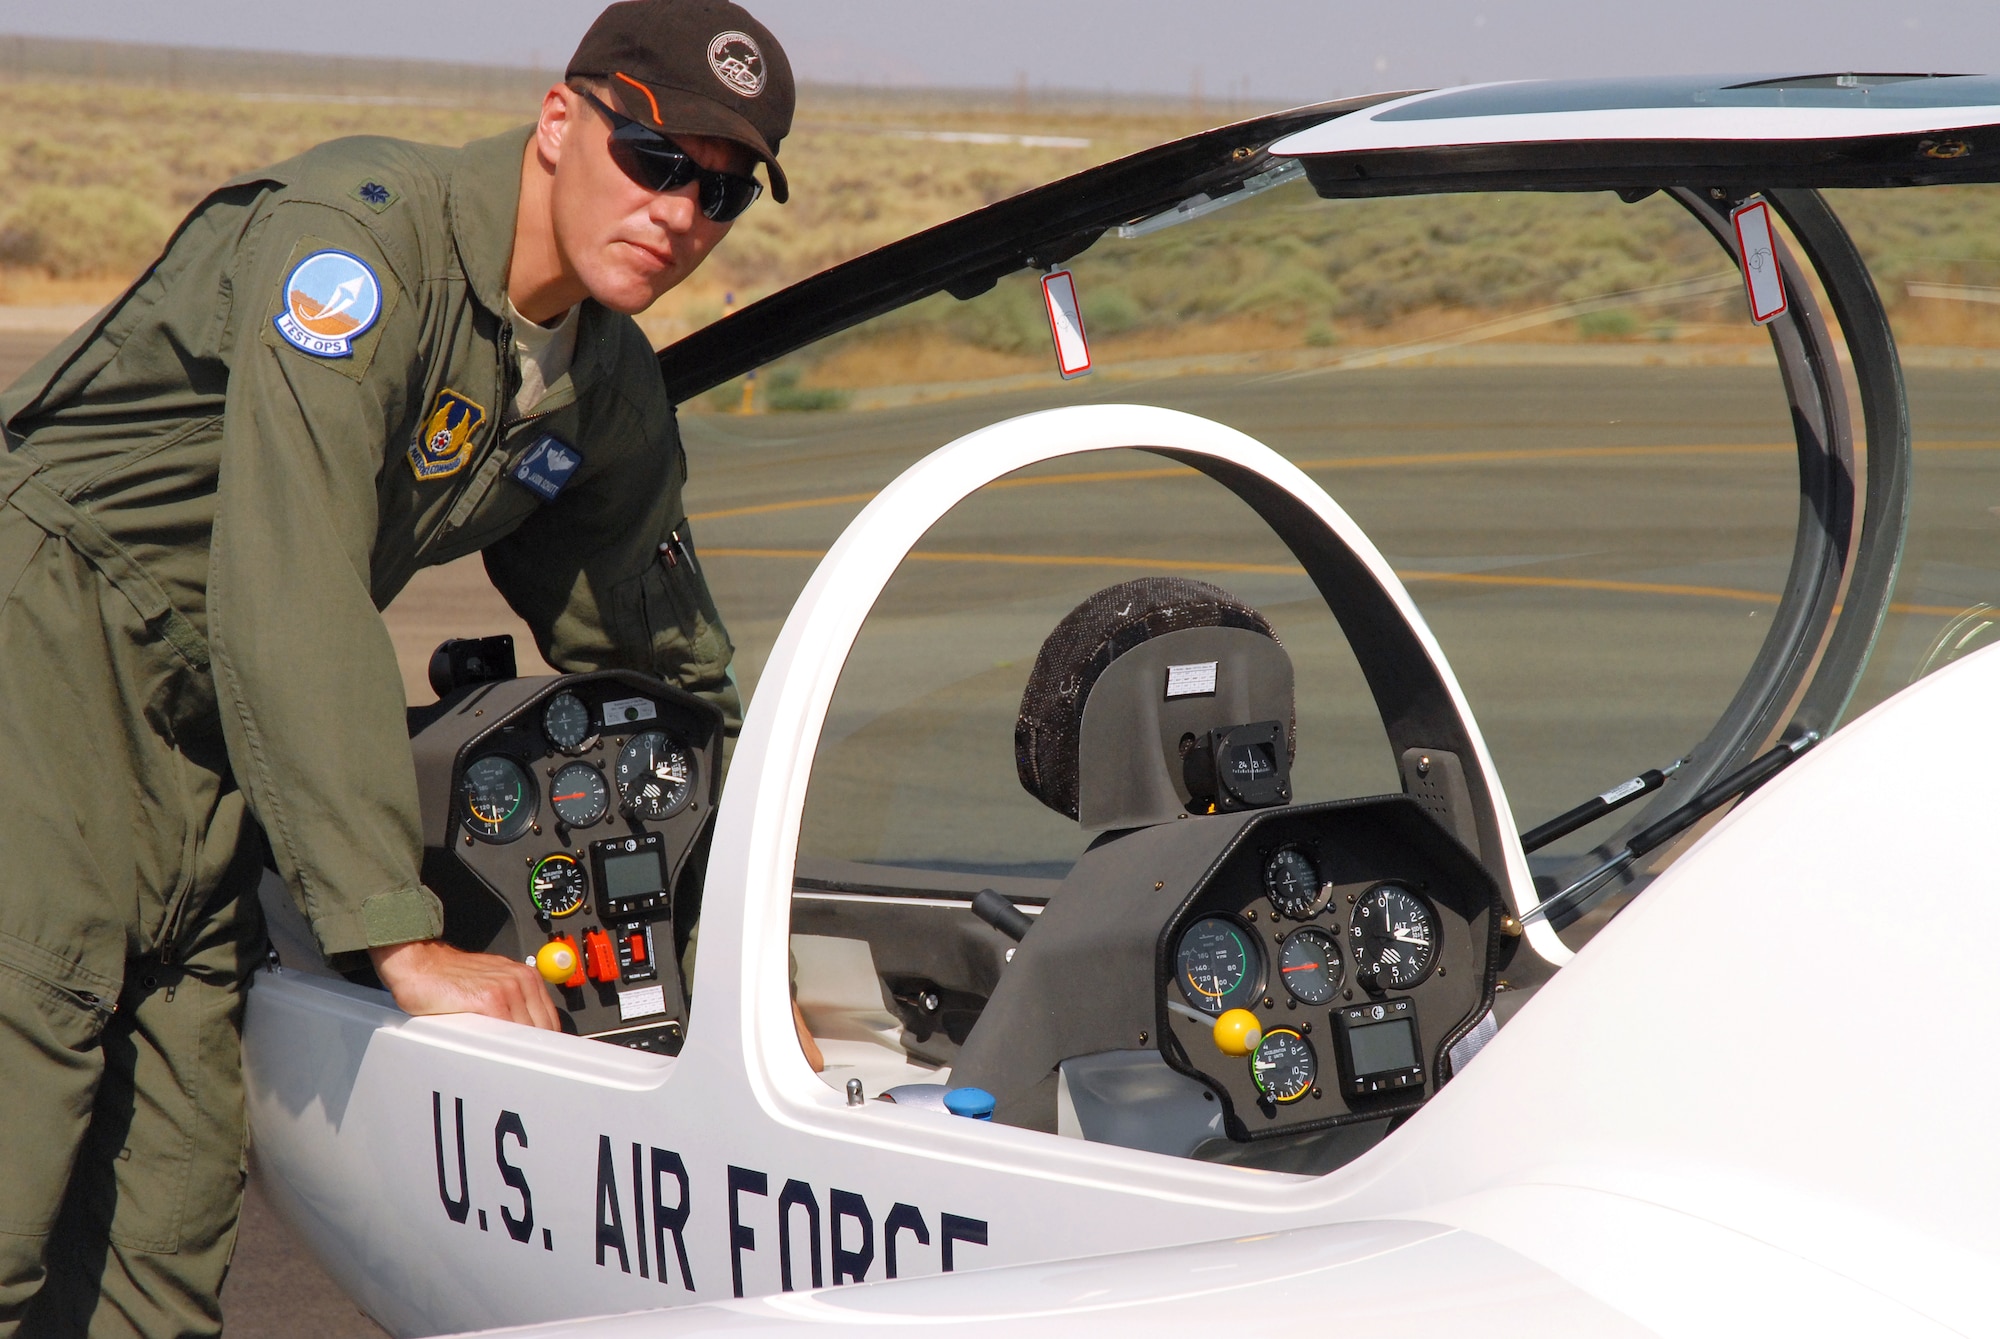 Lt. Col. Jason Schott, 445th Flight Test Squadron commander and Test Operations Combined Test Force director, makes final checks before taking off in a TG-16A glider. The Air Force Academy purchased 19 new gliders this month to replace its aging fleet. The 445th FLTS tested one of the gliders to ensure it meets the needs of the academy. (Air Force photo by Kenji Thuloweit)